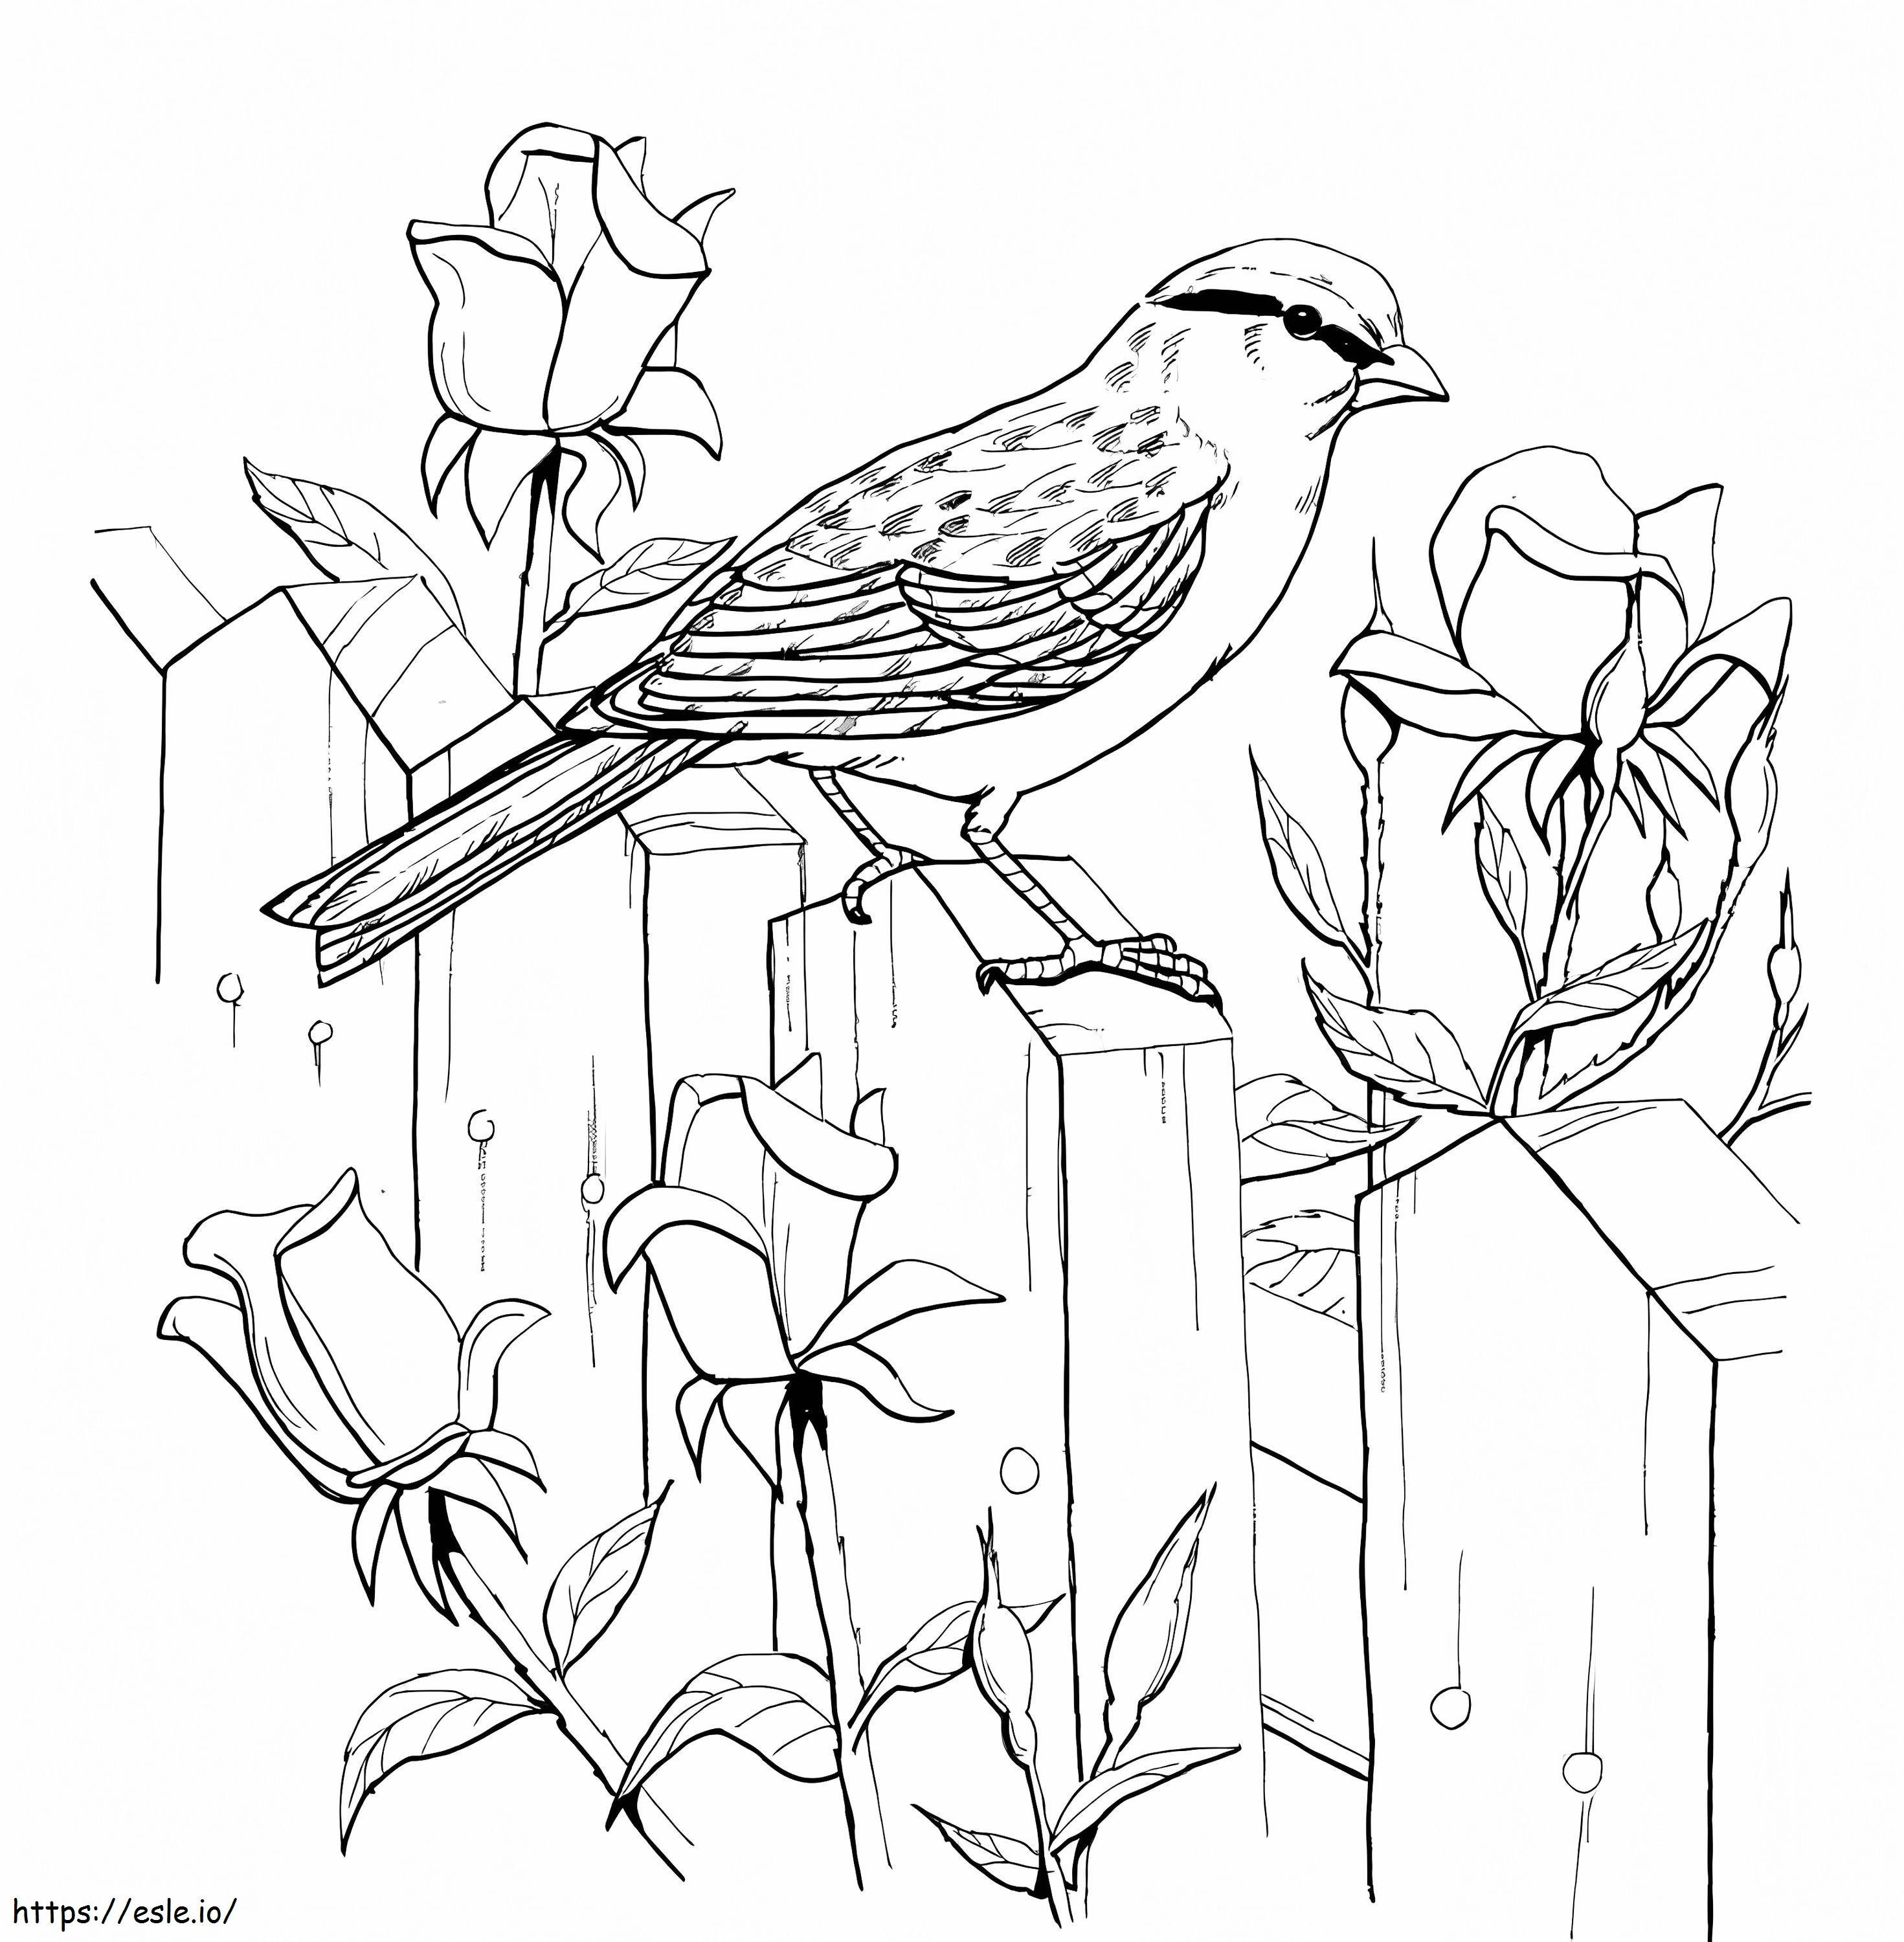 Sparrow Sparrow On The Fence coloring page